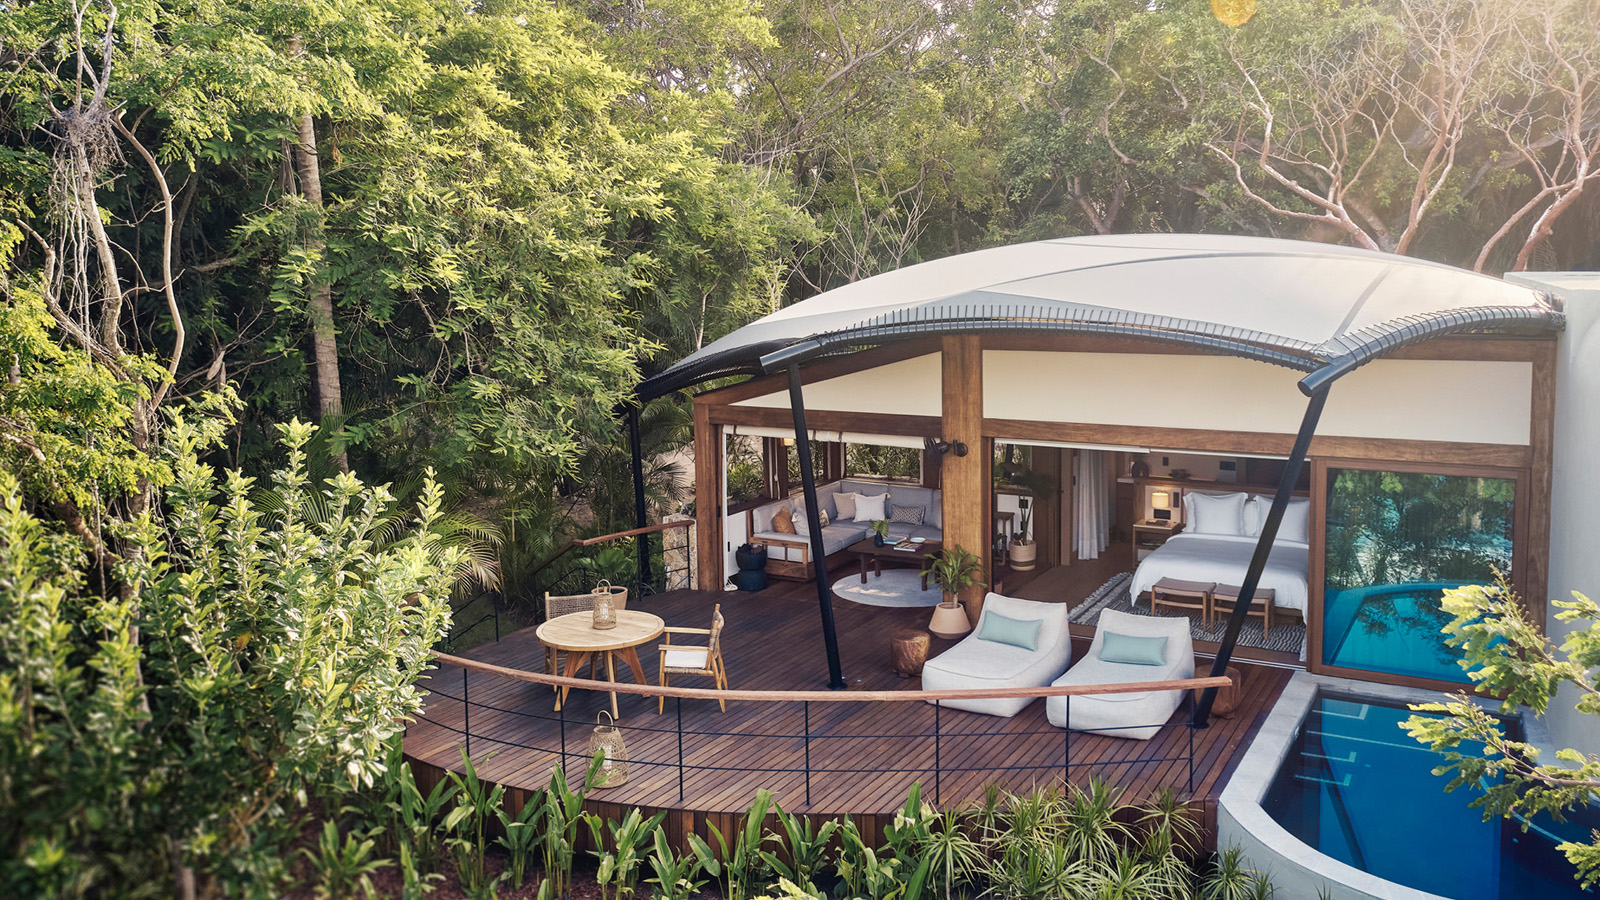 Luxury tented camp Naviva, A Four Seasons Resort, is now welcoming guests to the verdant rainforests of Mexico's Punta Mita.